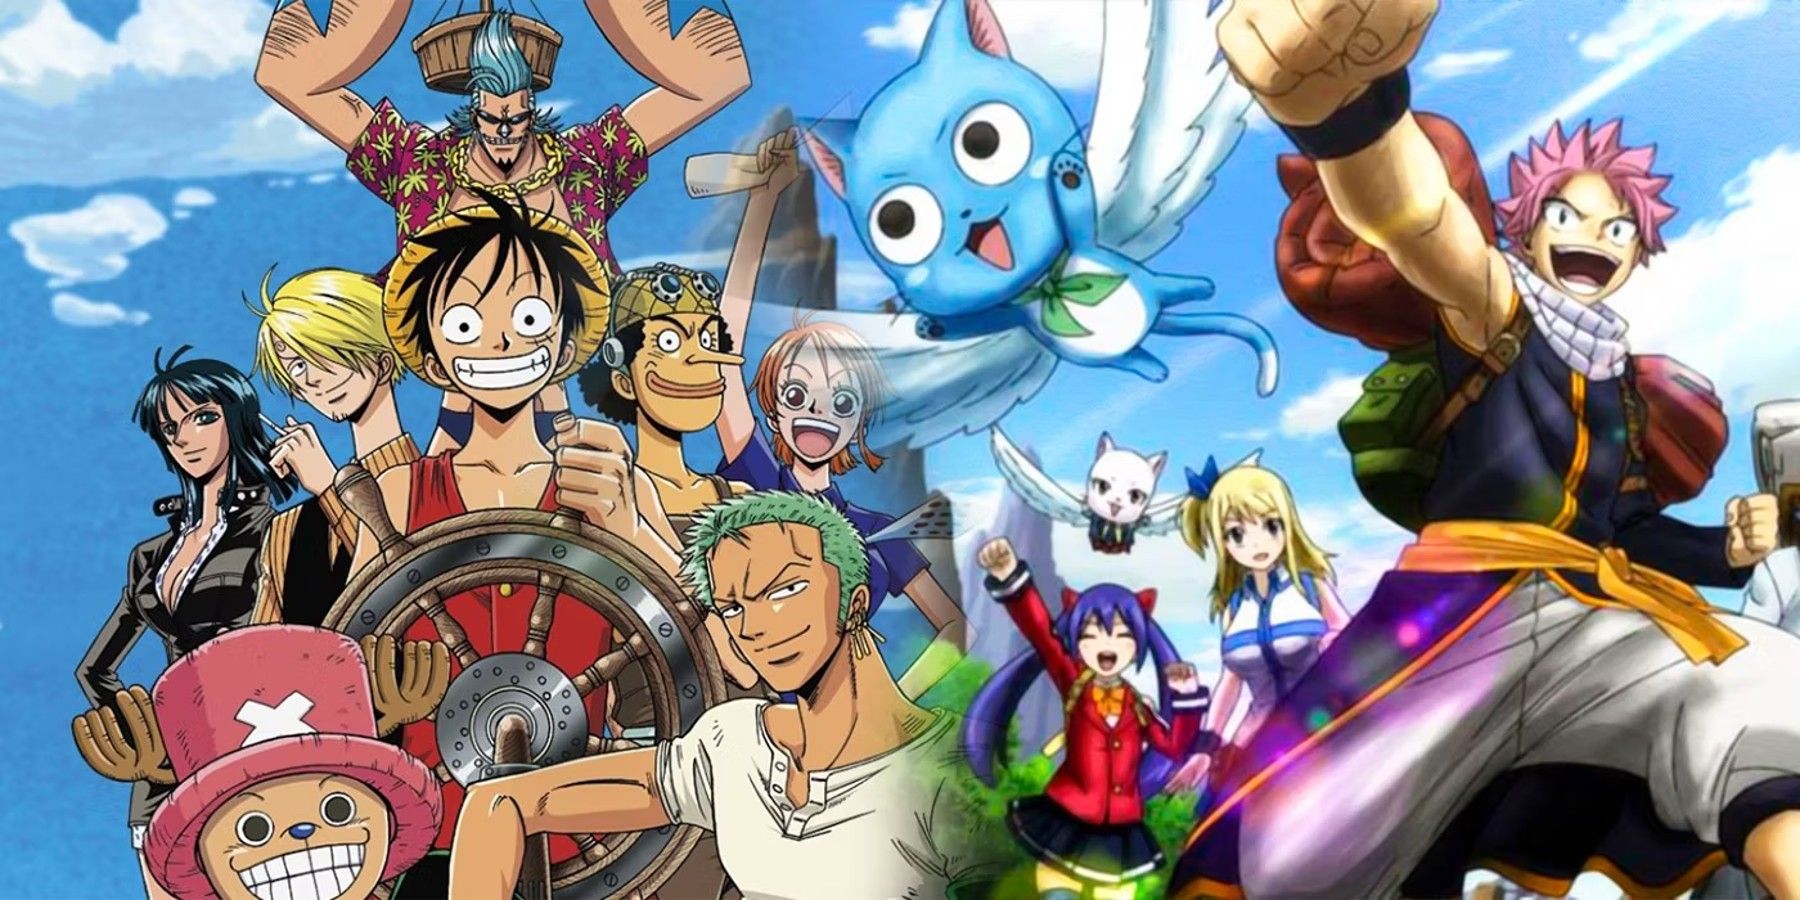 10 Things Fairy Tail Ripped Off From Other Anime